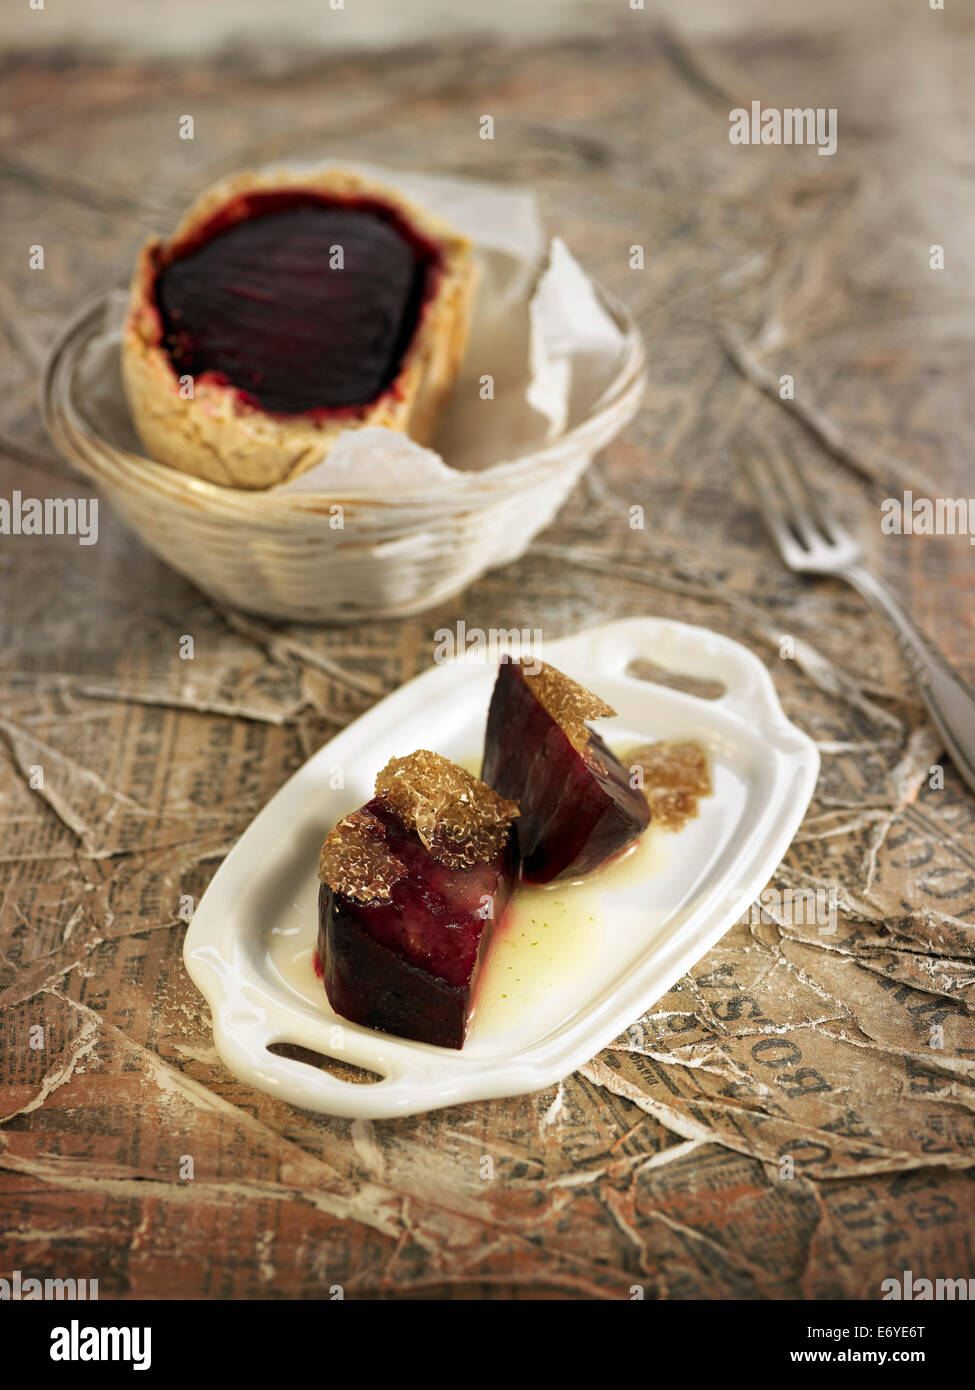 Beetroot in crust pastry with trufles Stock Photo